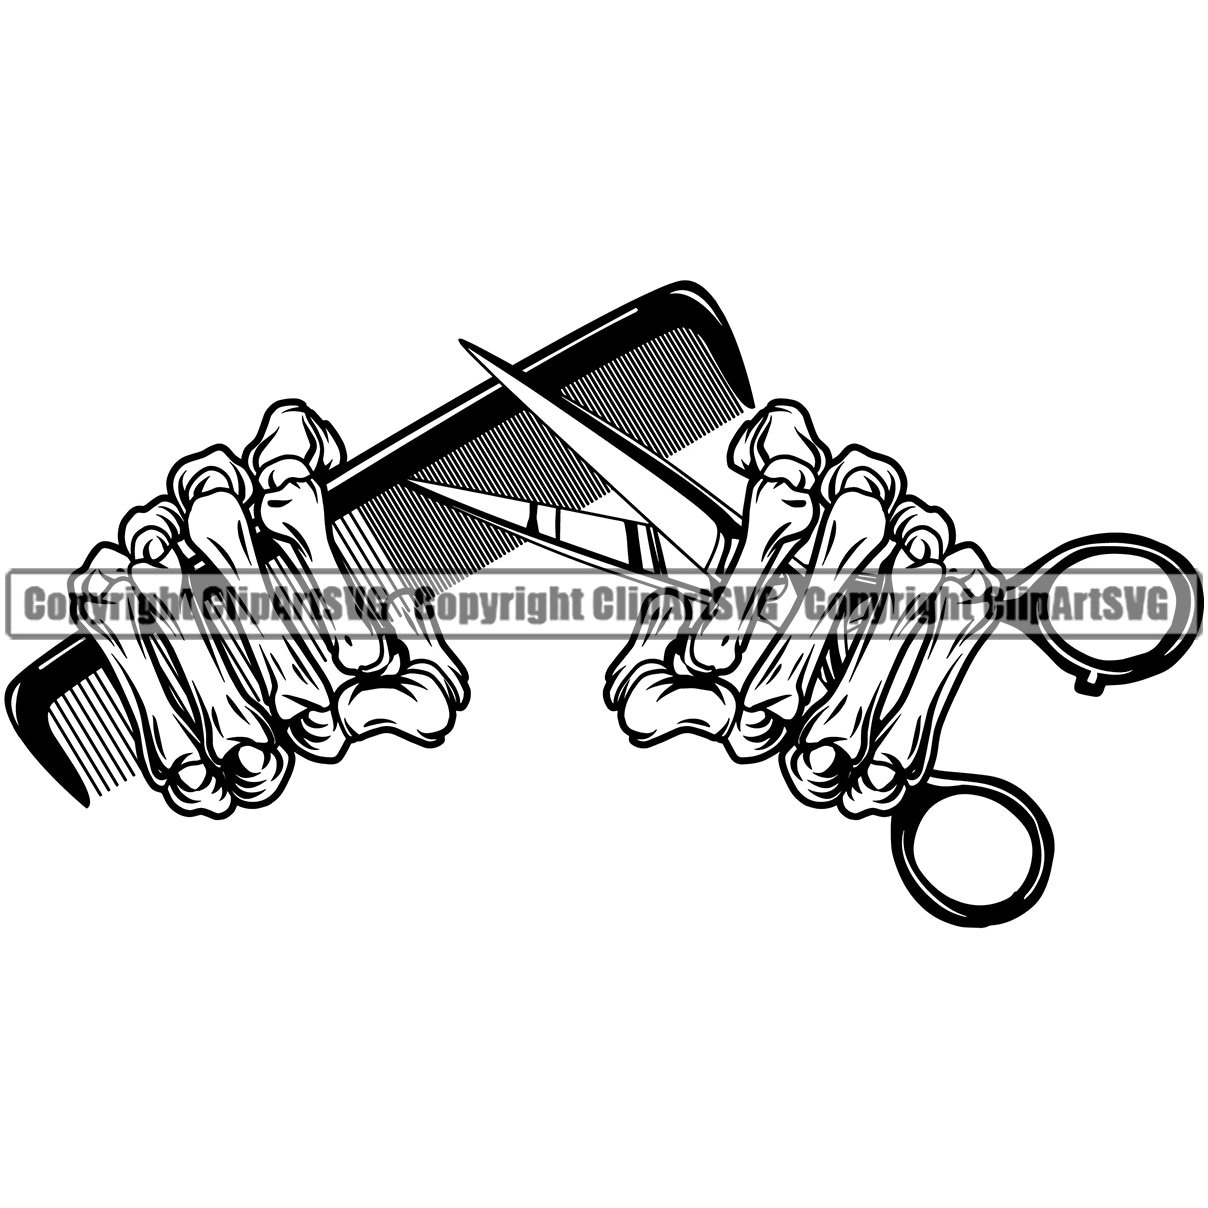 Monochrome set of outlined barbershop items hipster skull, scissors, comb  and barber pole, vector illustration isolated on white background. Barber  shop set hipster barber skull and tools Stock Vector